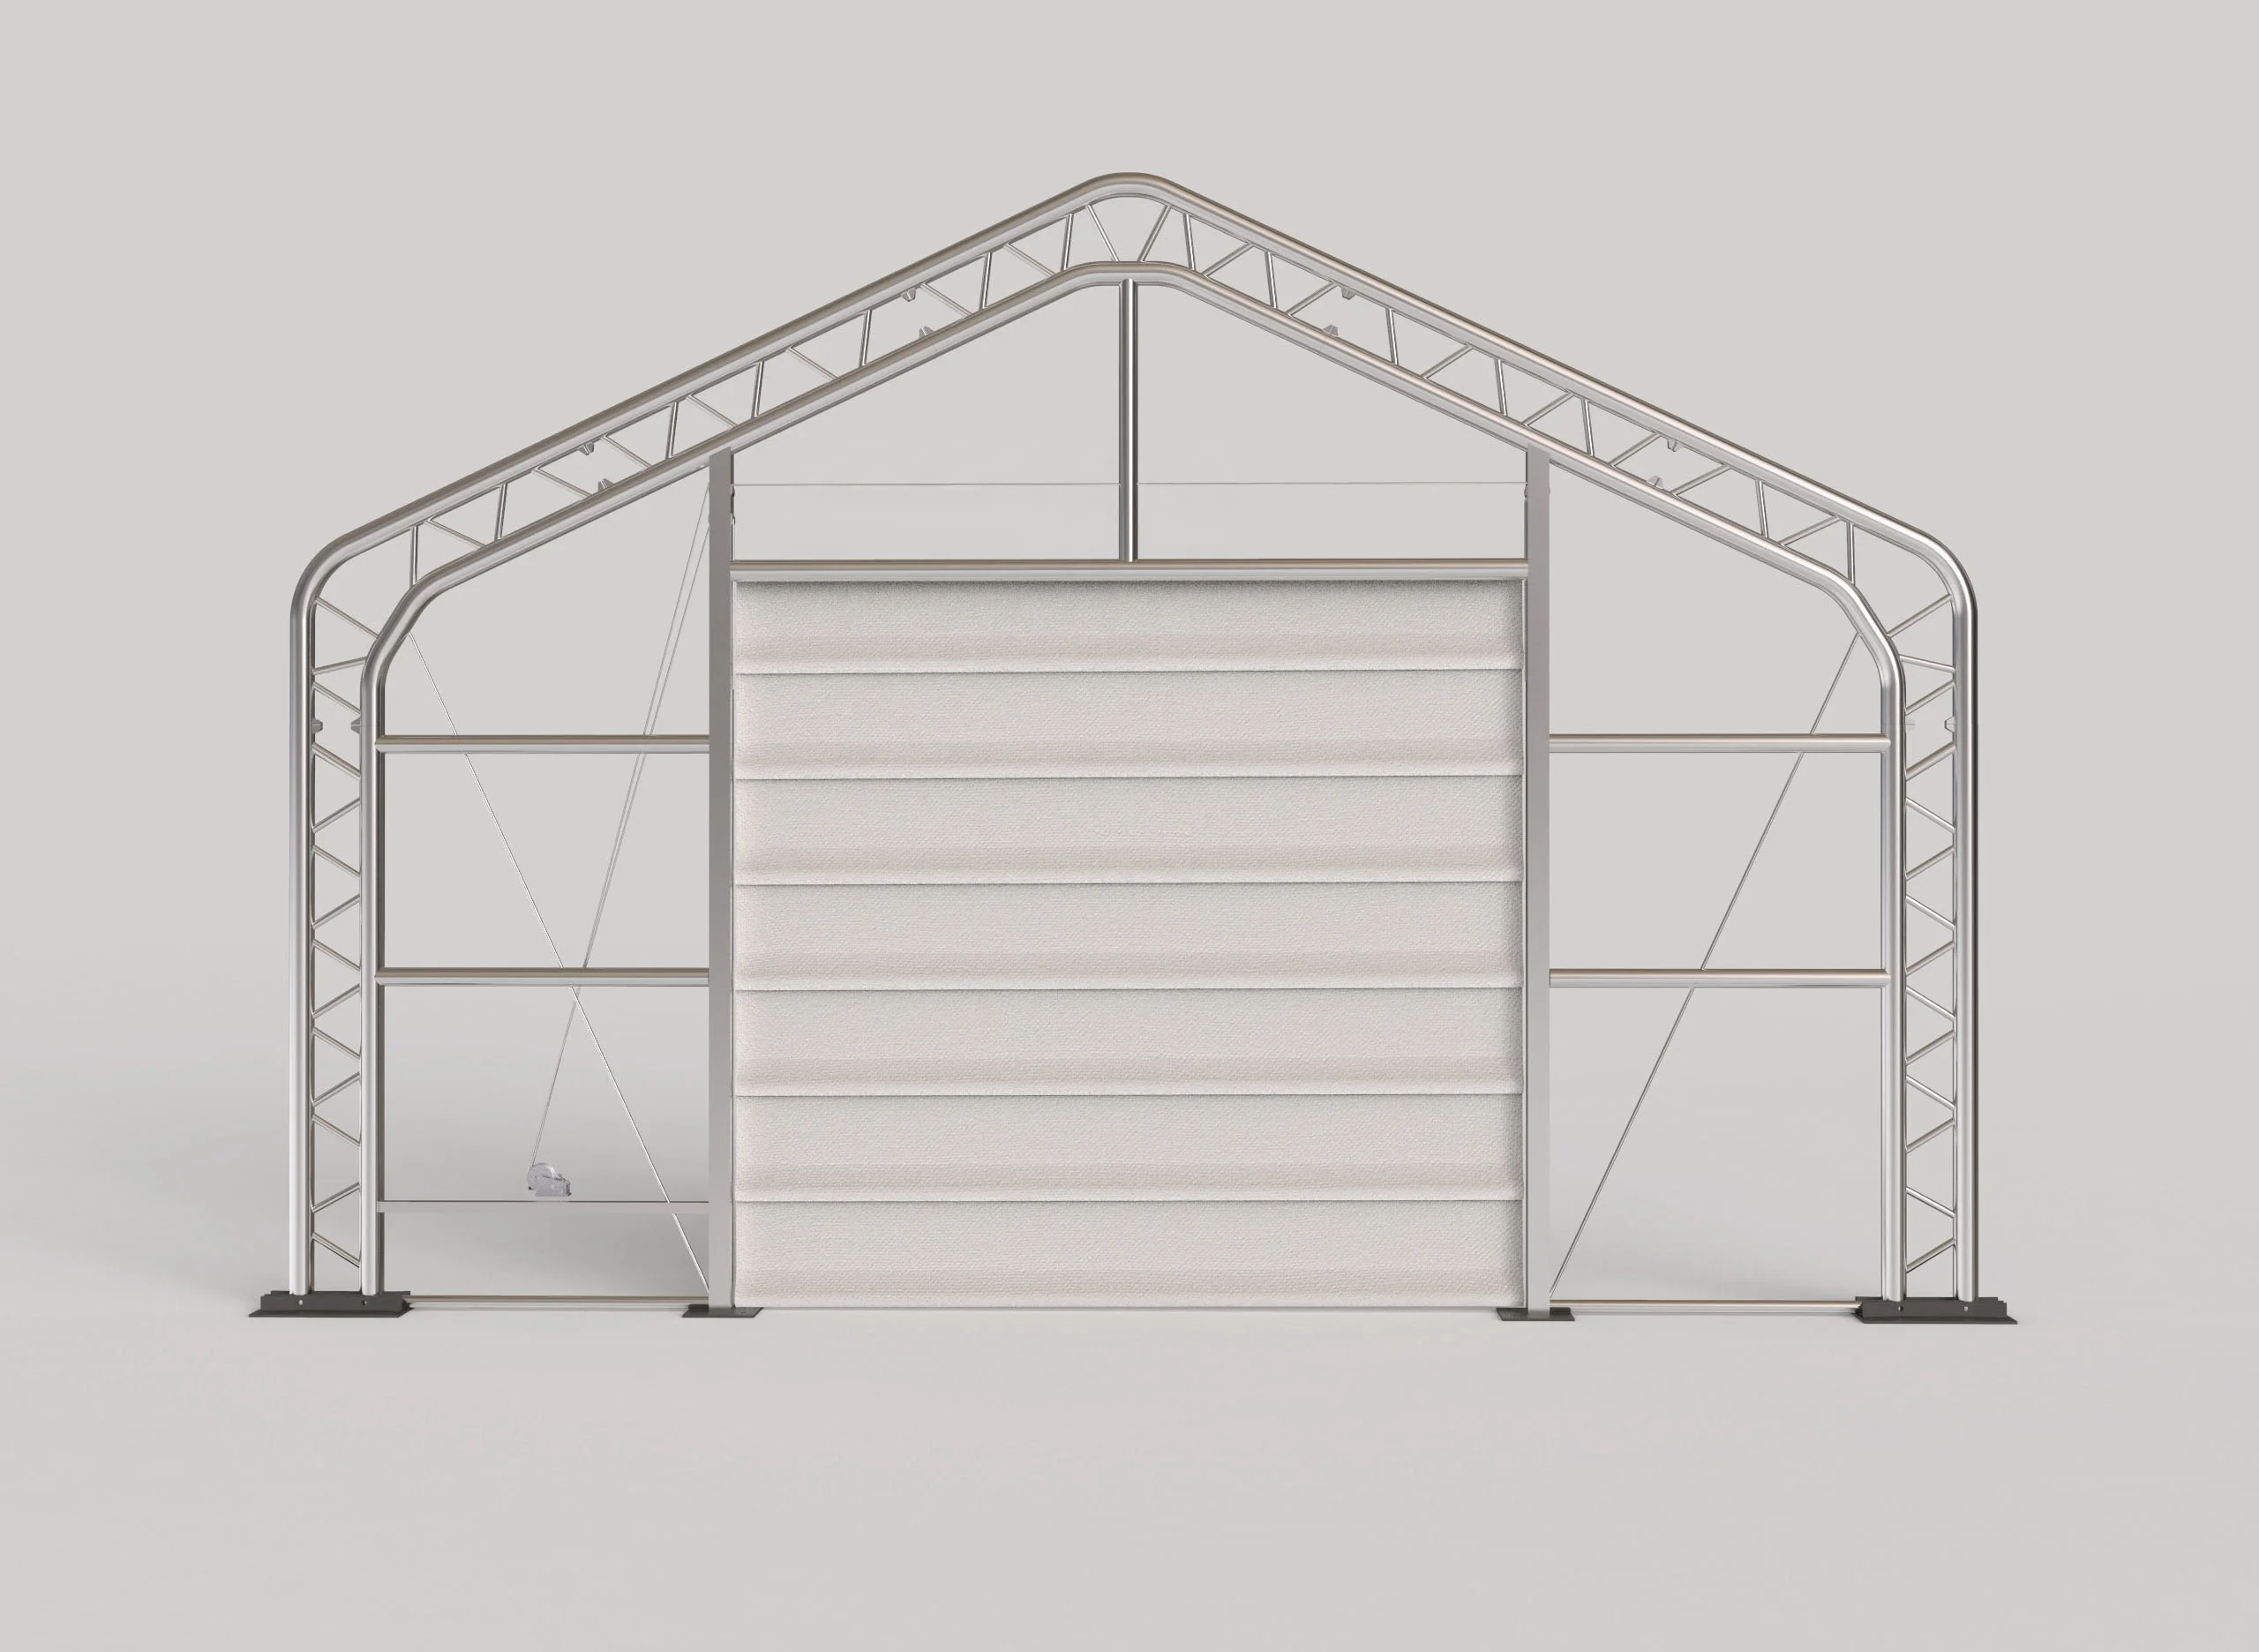 PVC workshop industrial fabric tent shade structure